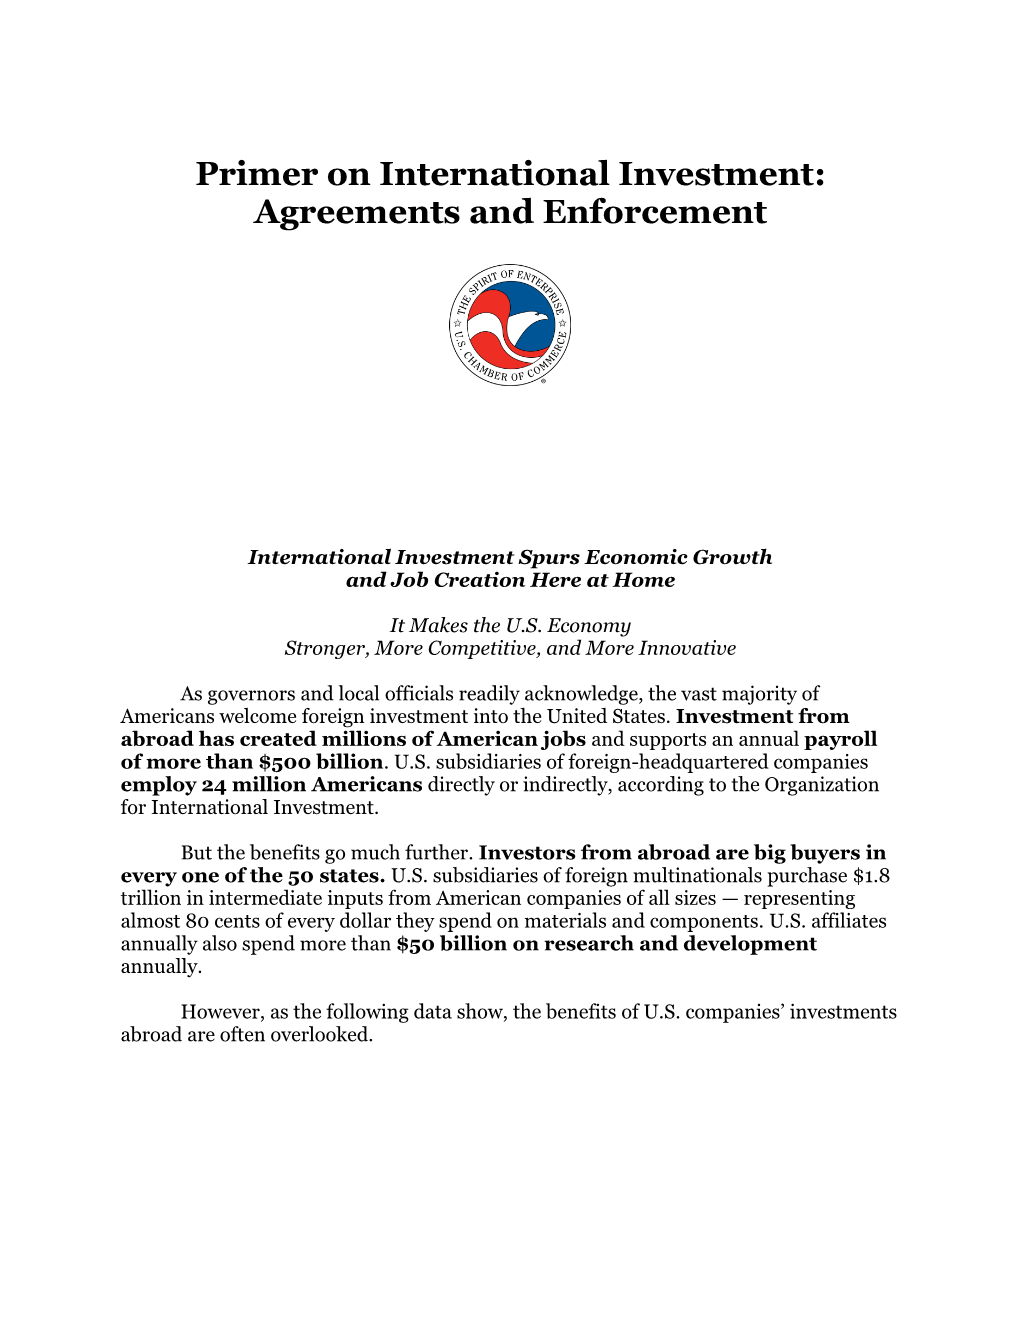 Primer on International Investment: Agreements and Enforcement